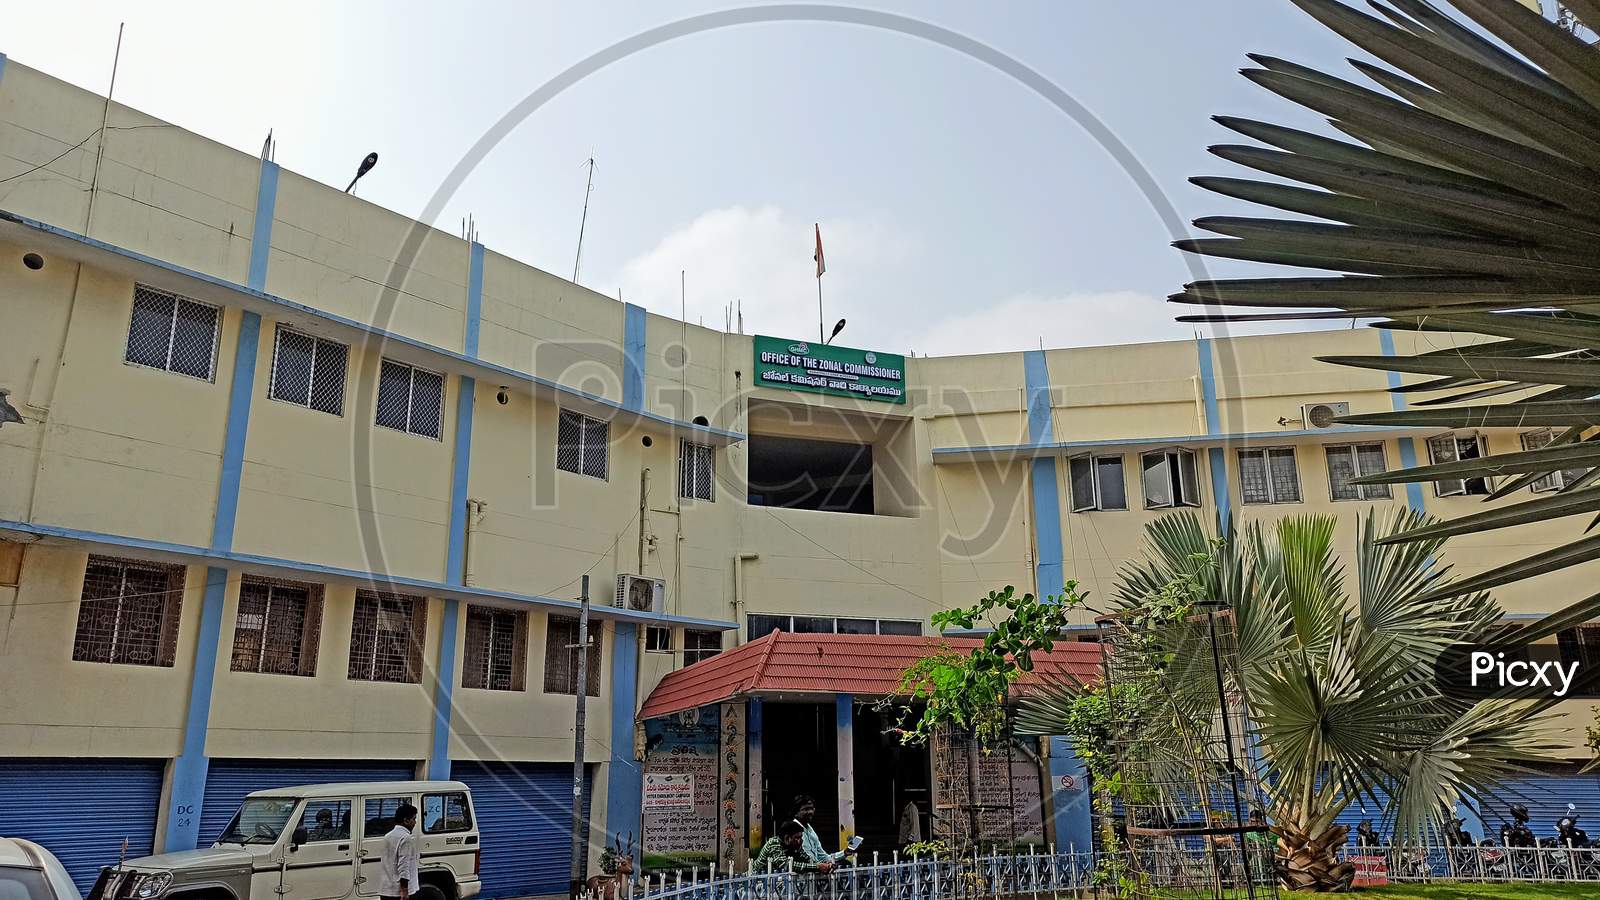 GHMC Office Of The Zonal Commissioner Kukatpally Zone Moosapet